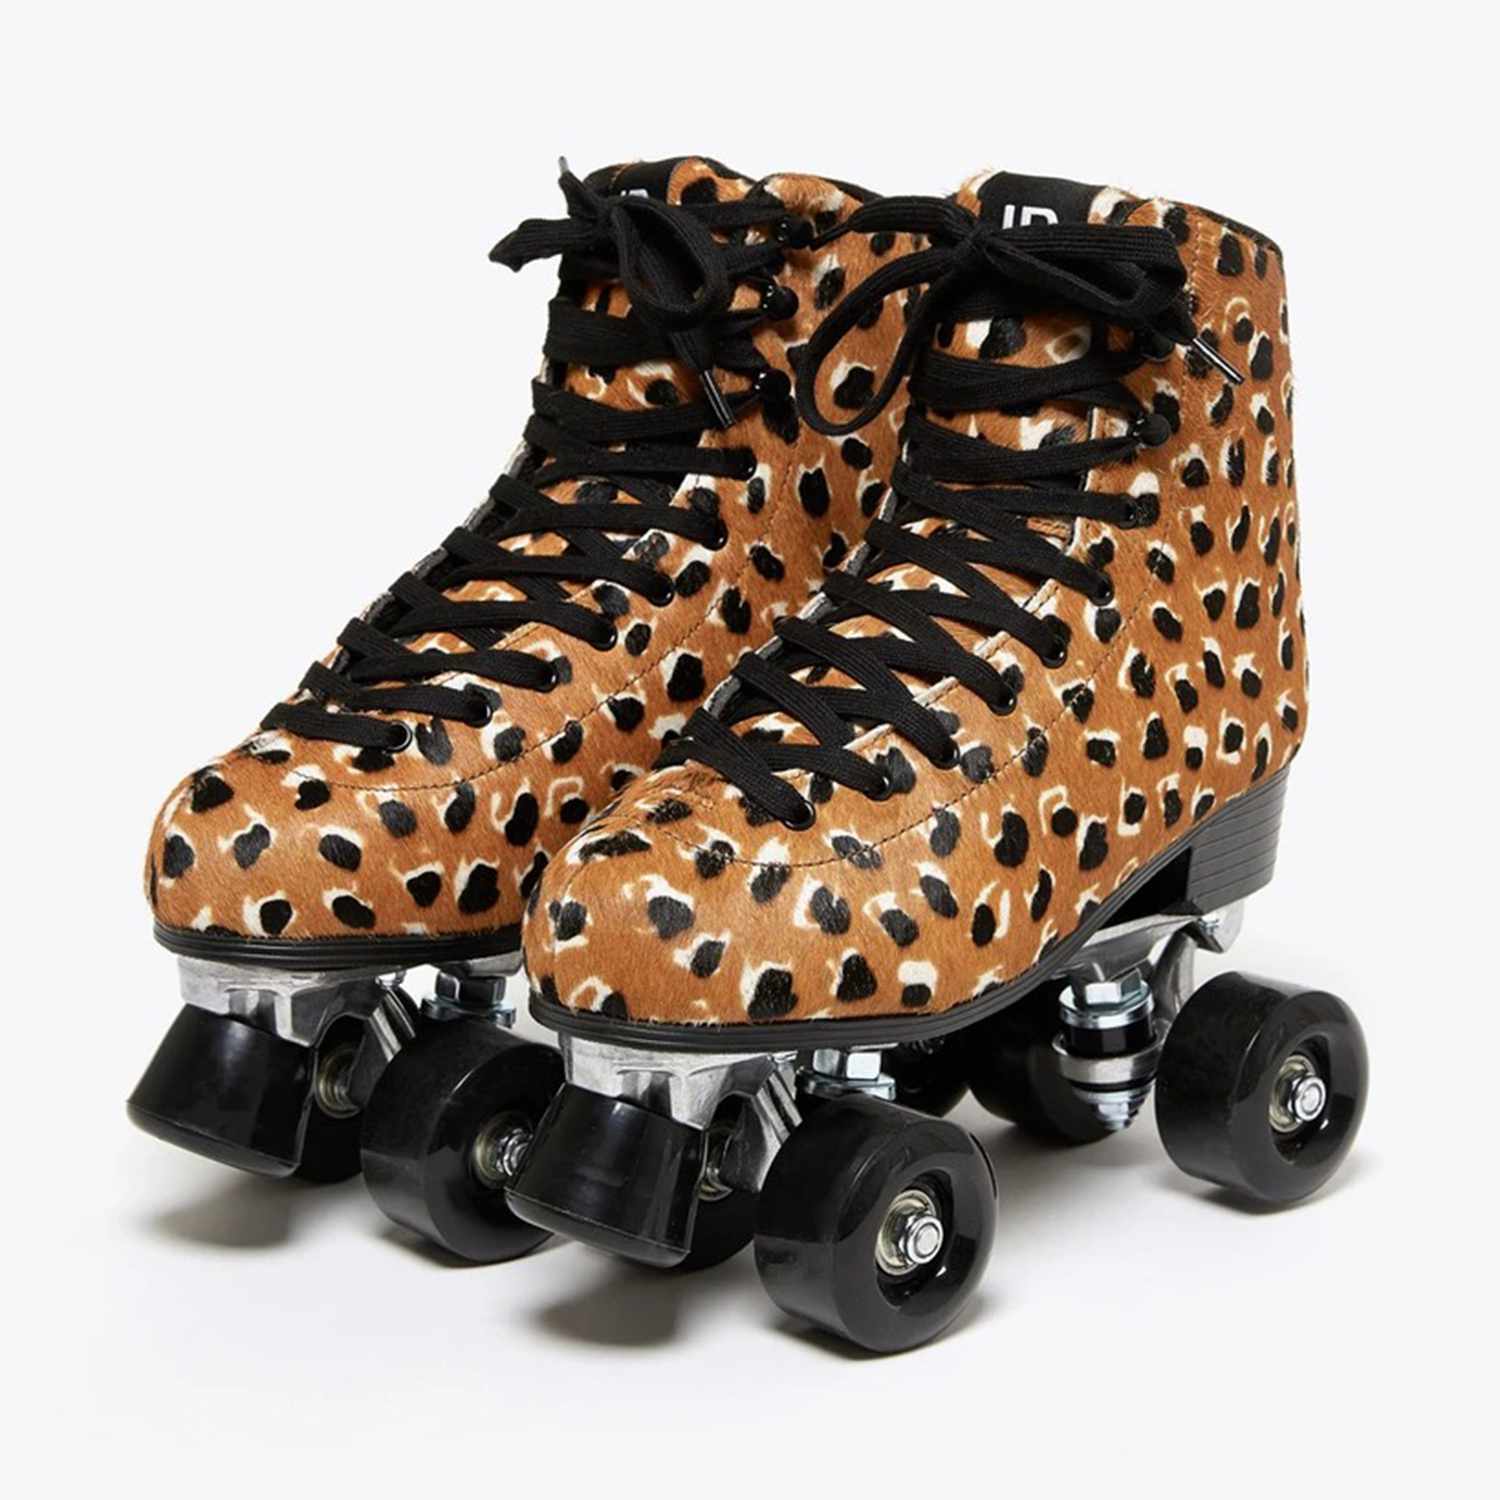 Redson Womens Roller Skates Four-Wheels Artificial Leather High-top Roller Skates Perfect Indoor Outdoor Adult Roller Skates with Bag